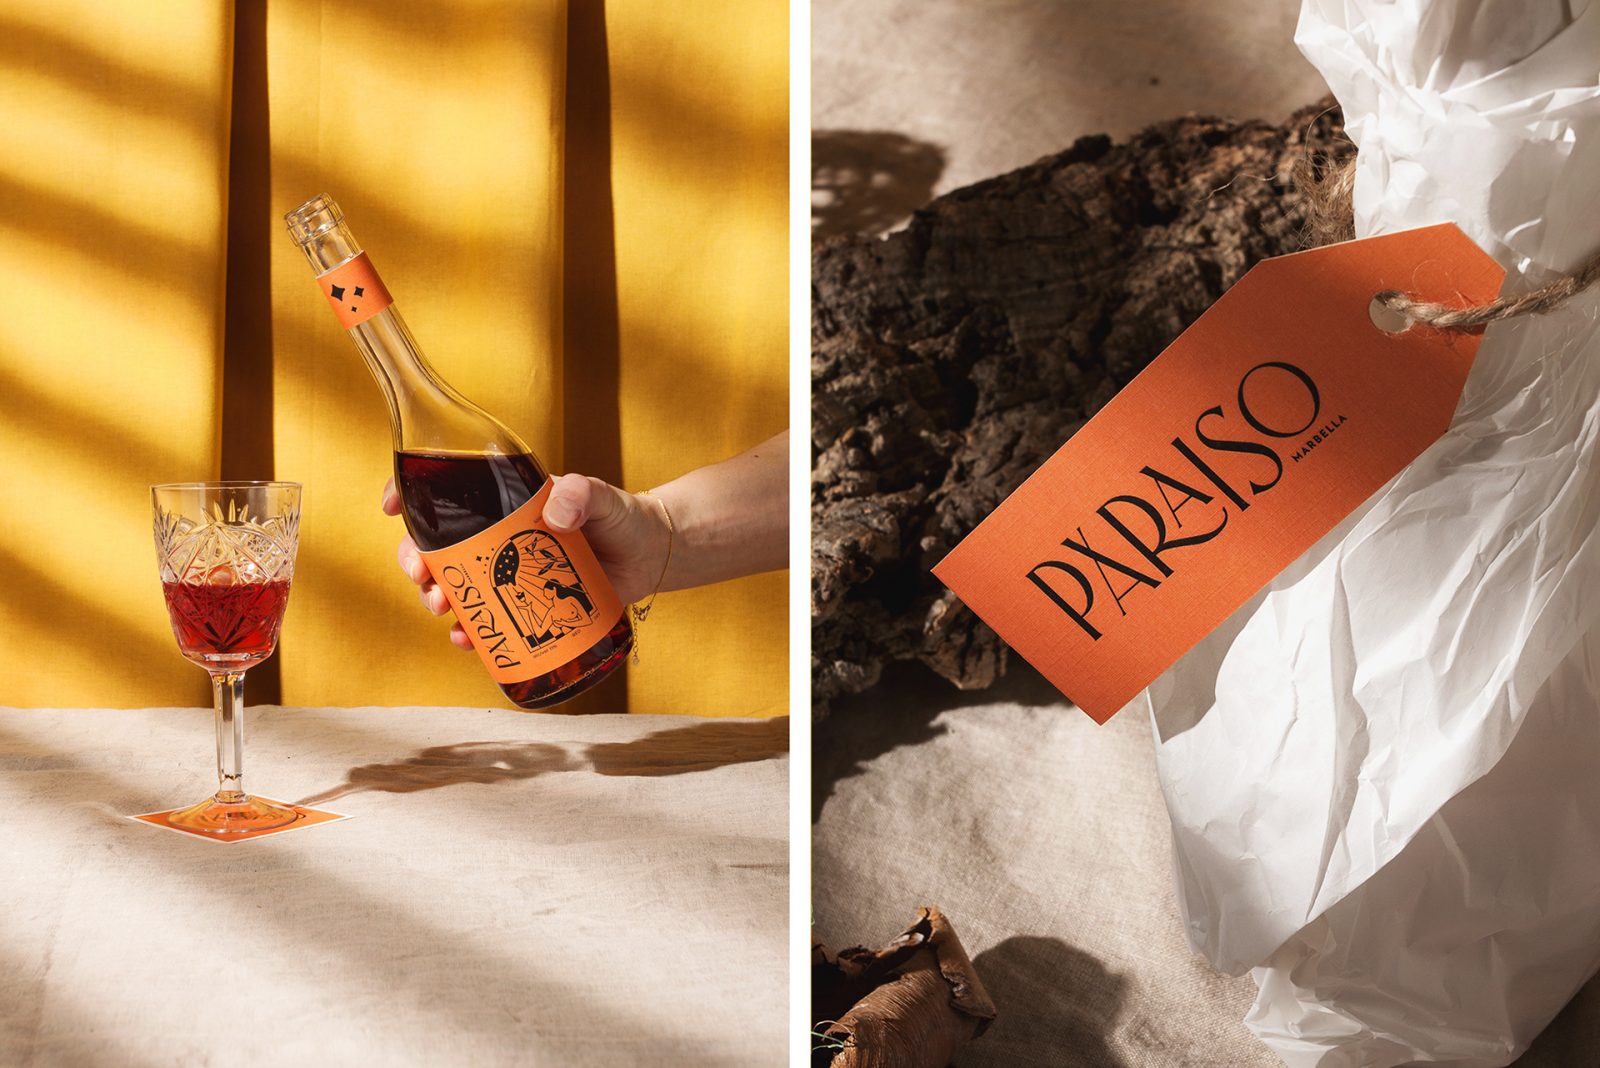 Paraiso Marbella by Unifikat Brings Sunshine in a Bottle